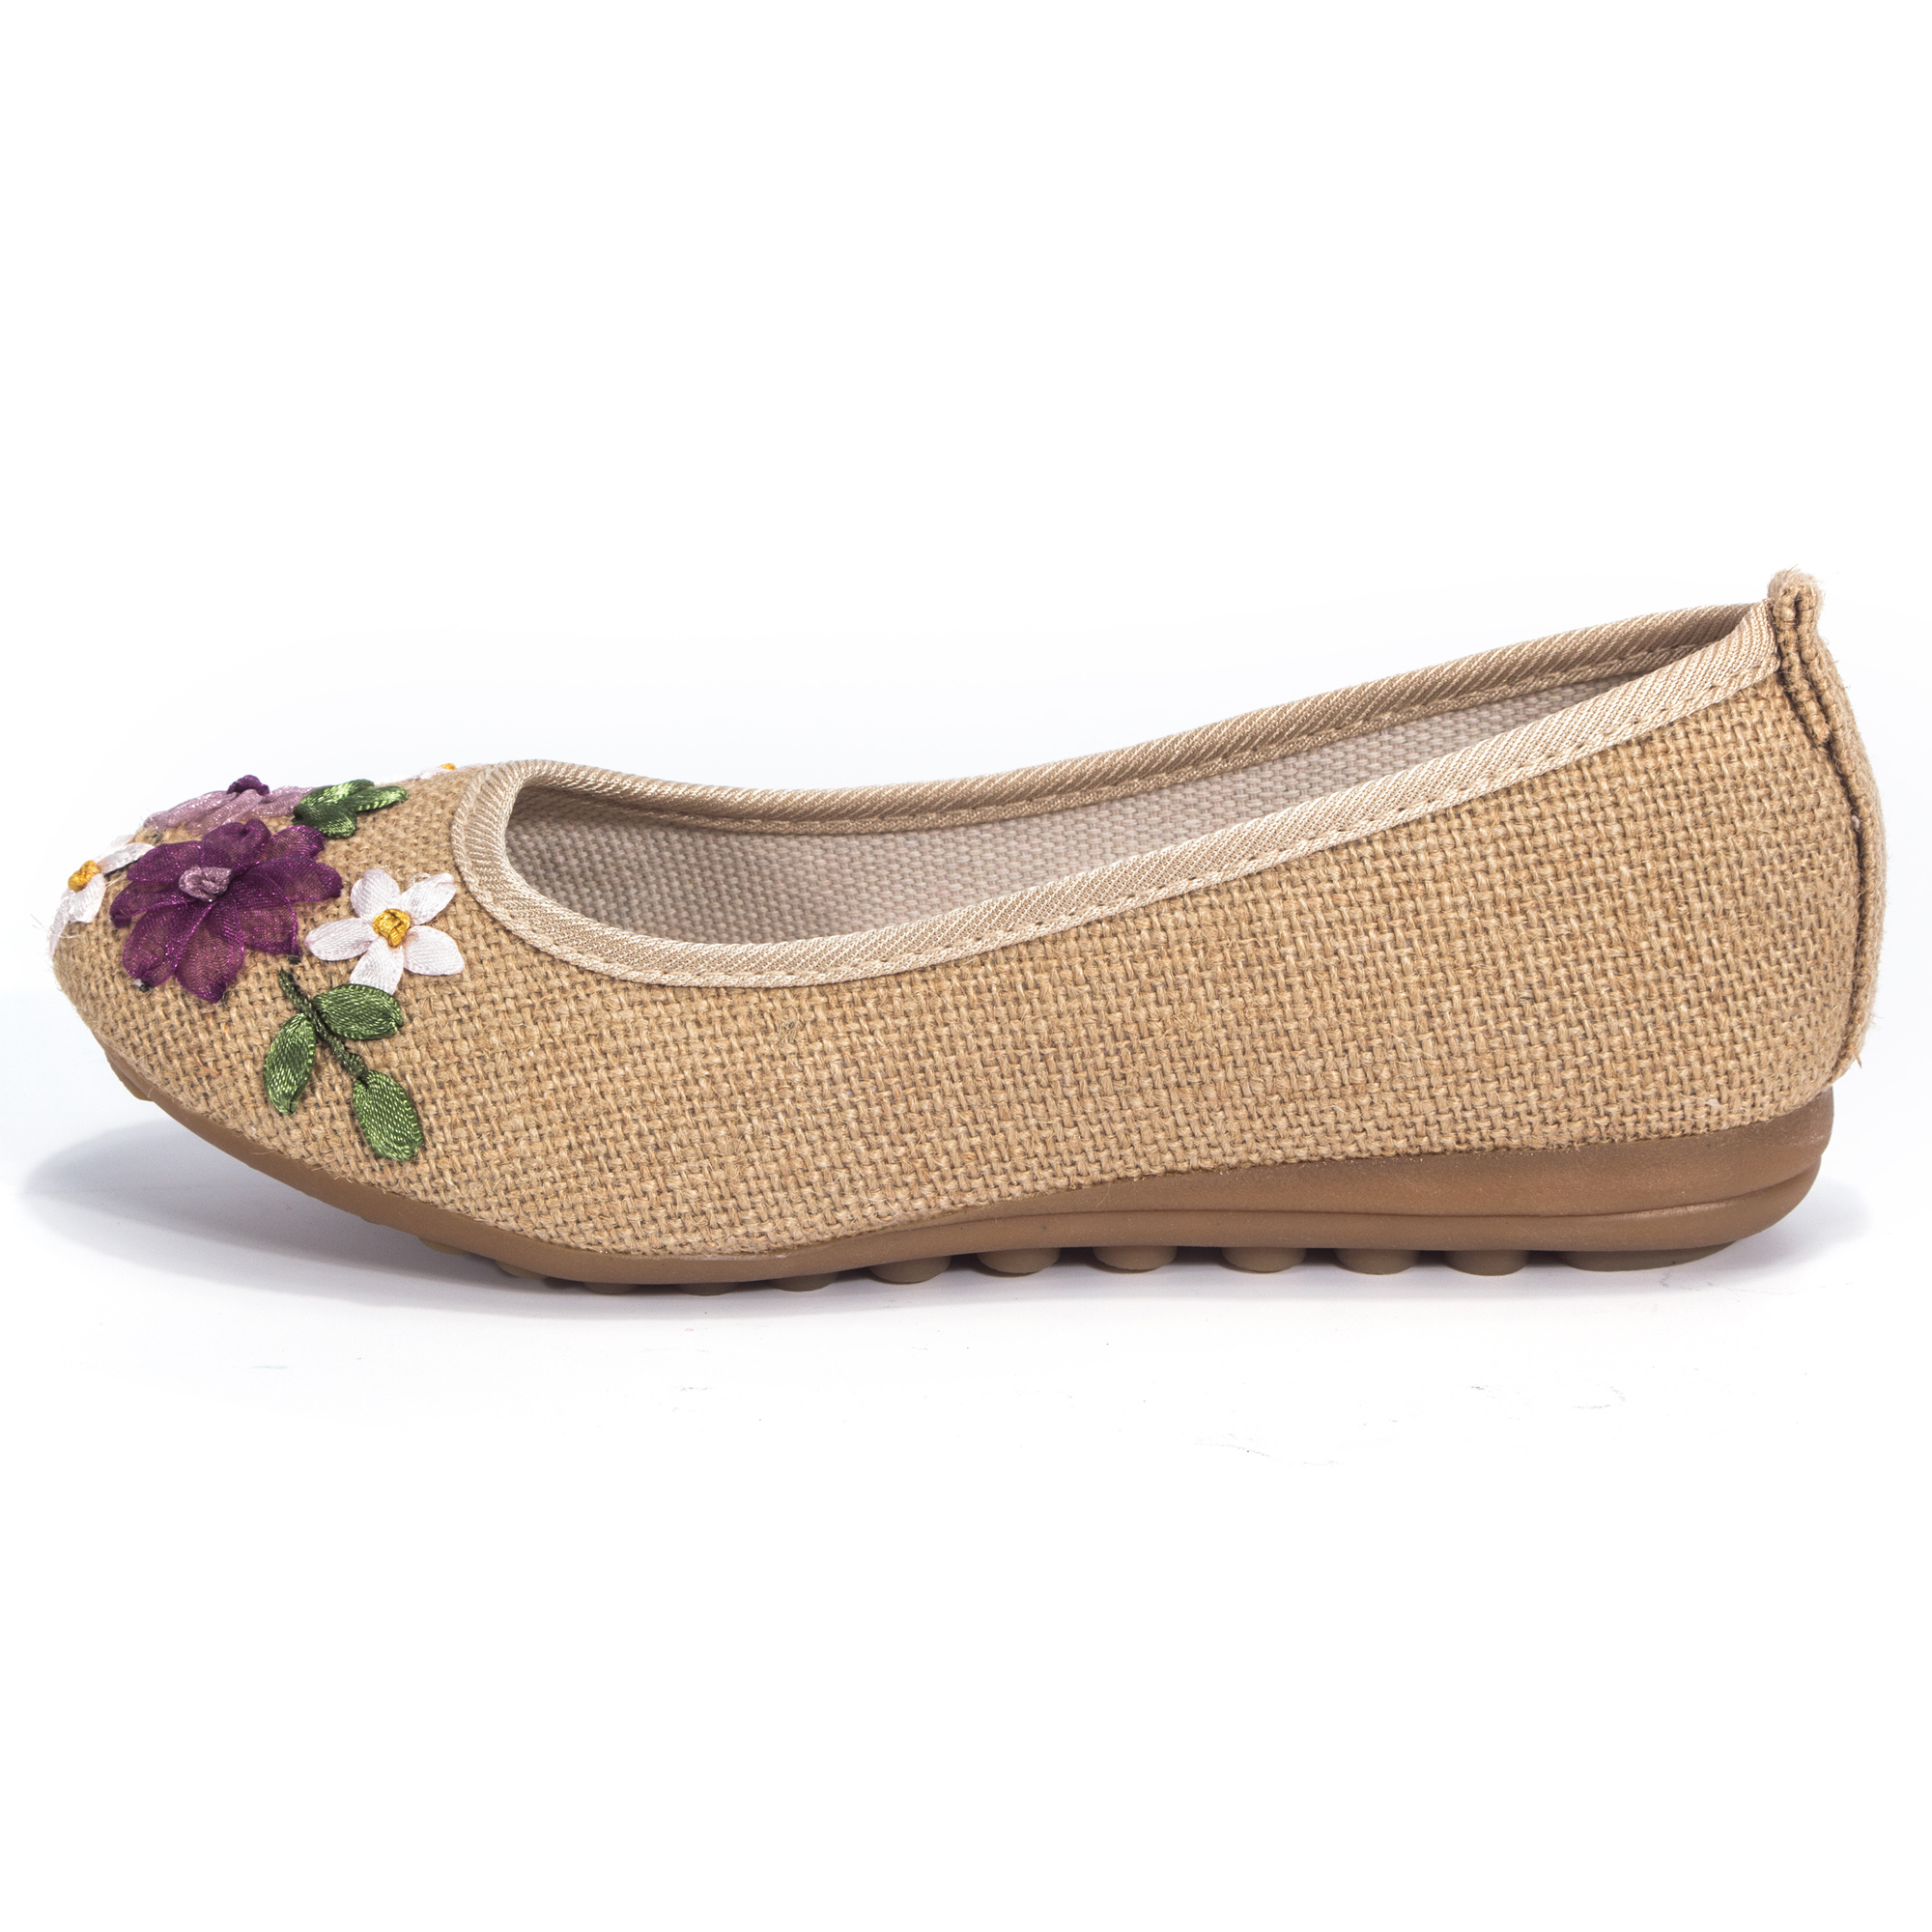 DODOING Womens Ballet Flats Floral Embroidered Cut Platform Shoe Slip On Casual Driving Loafers - image 5 of 7